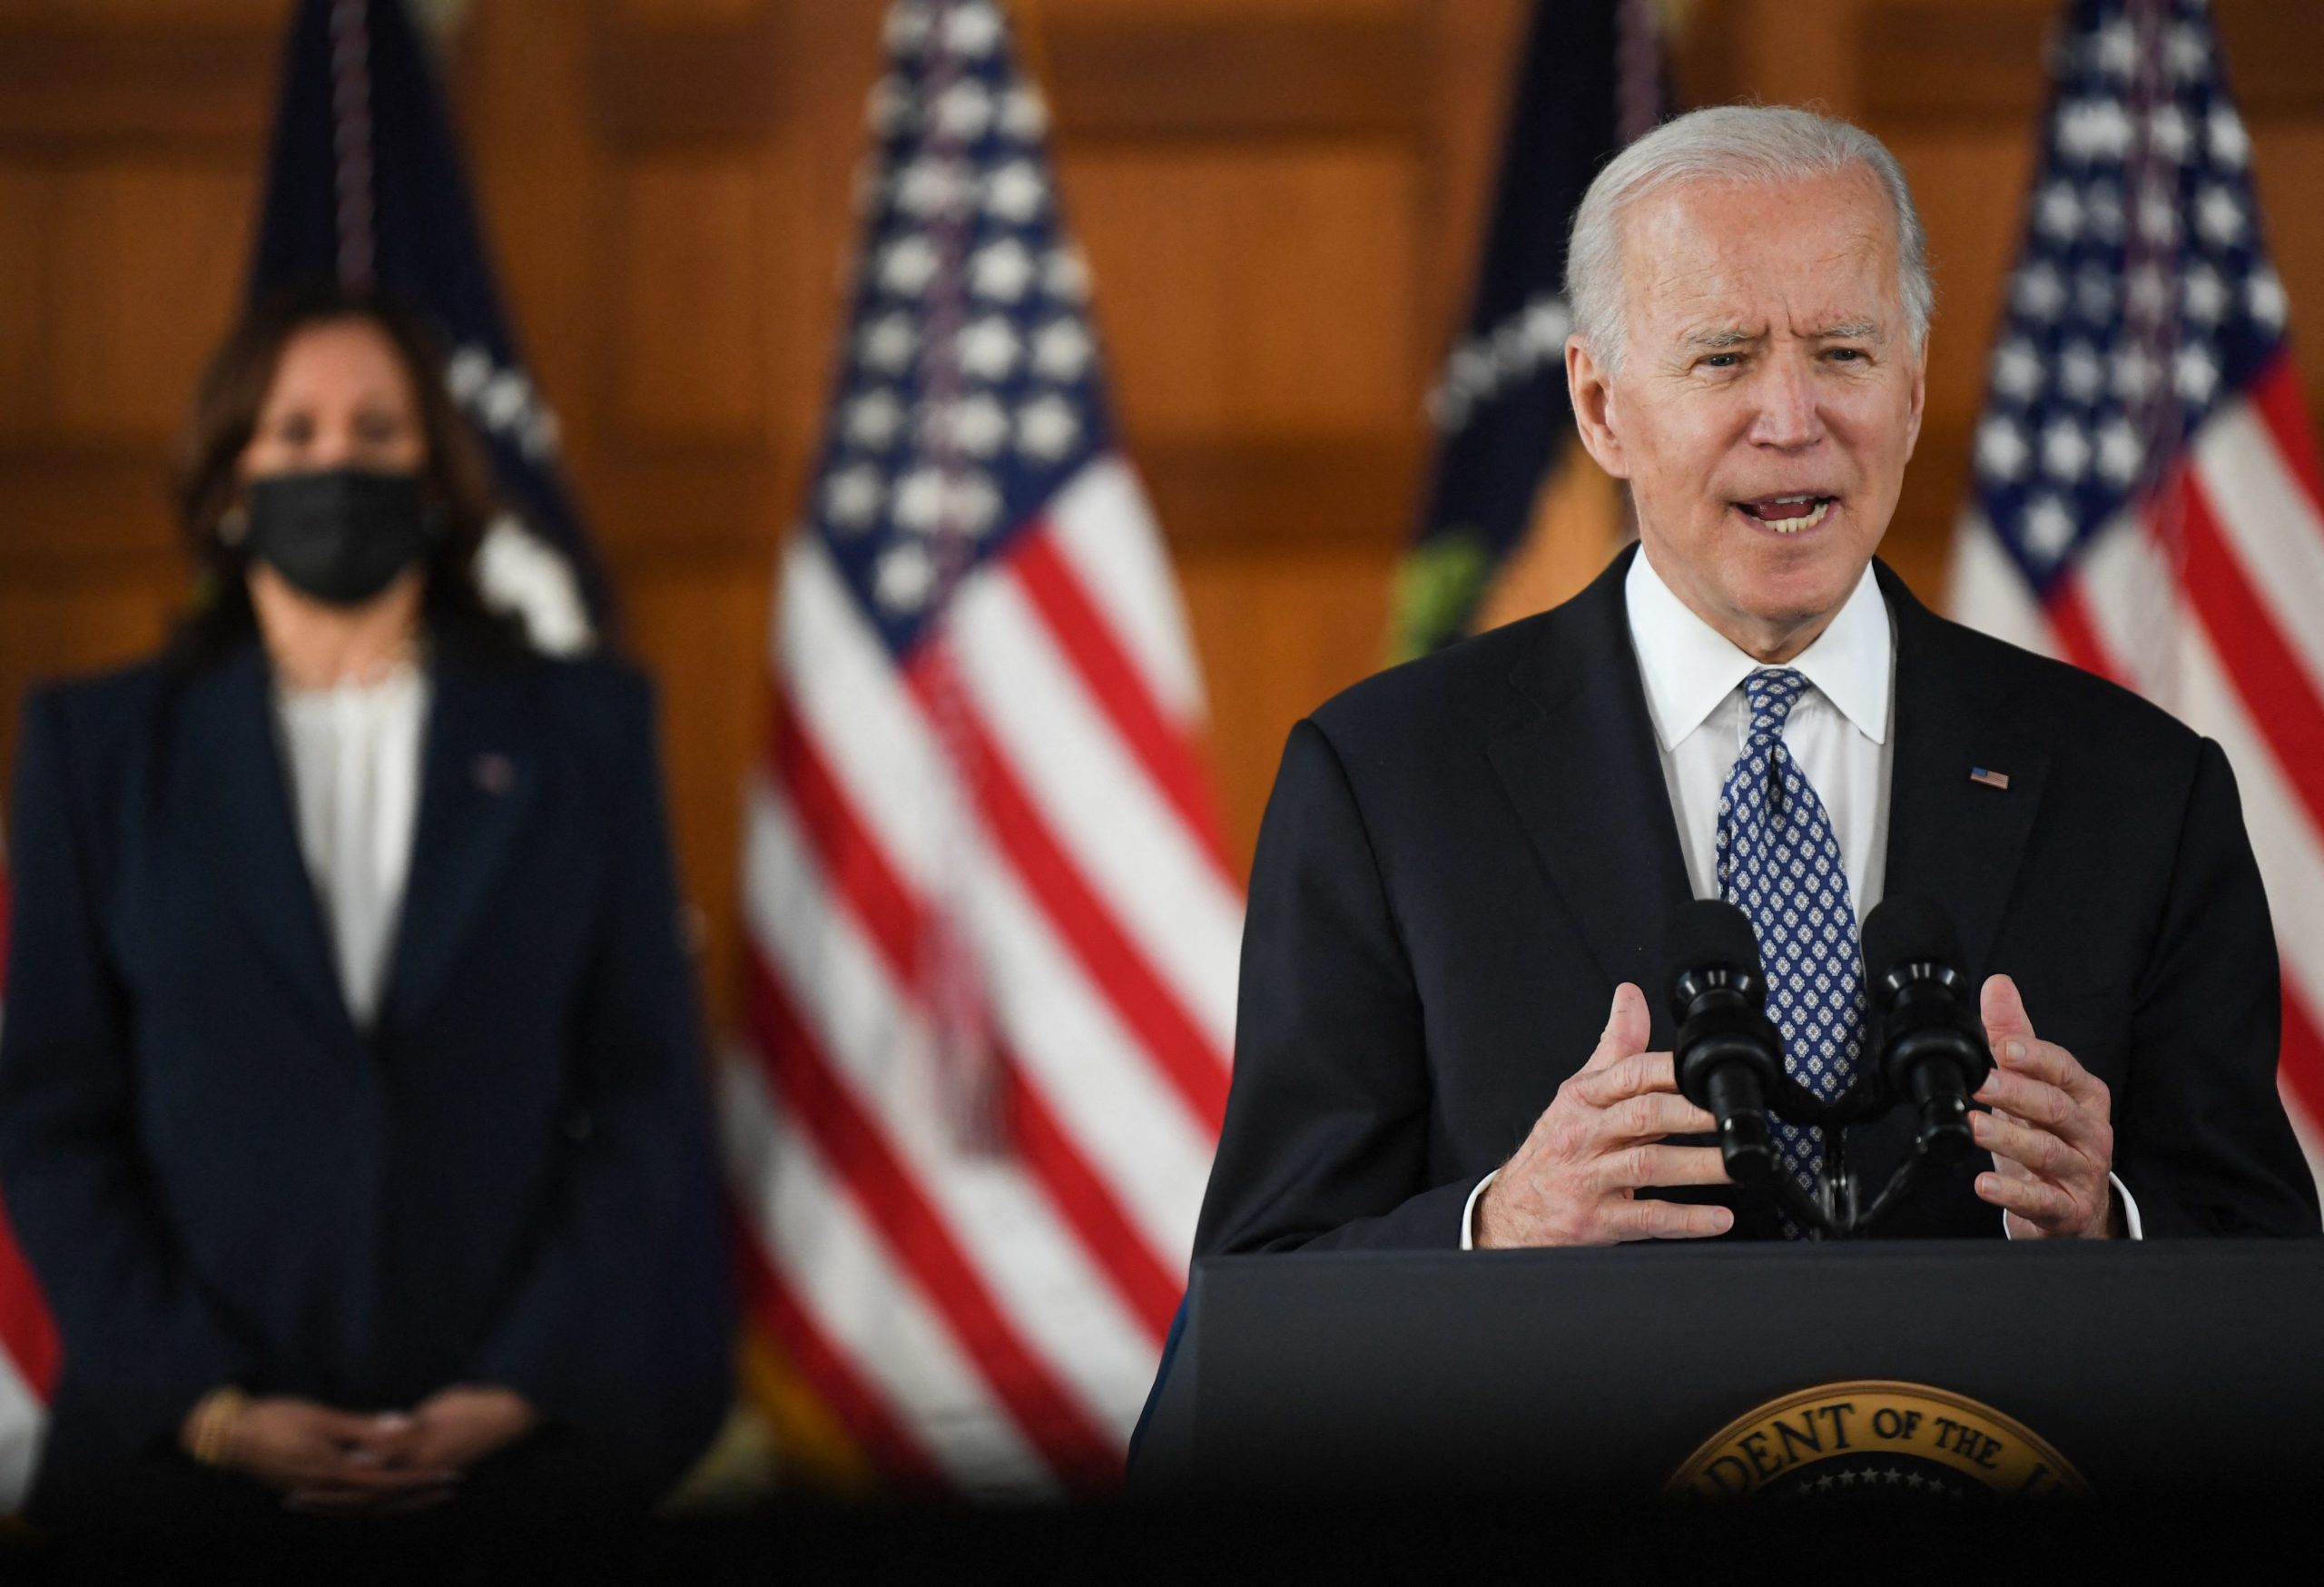 US President Joe Biden speaks as US Vice President Kamala Harris looks on during a listening session with Georgia Asian American and Pacific Islander community leaders at Emory University in Atlanta, Georgia on March 19, 2021. (ERIC BARADAT/AFP via Getty Images)